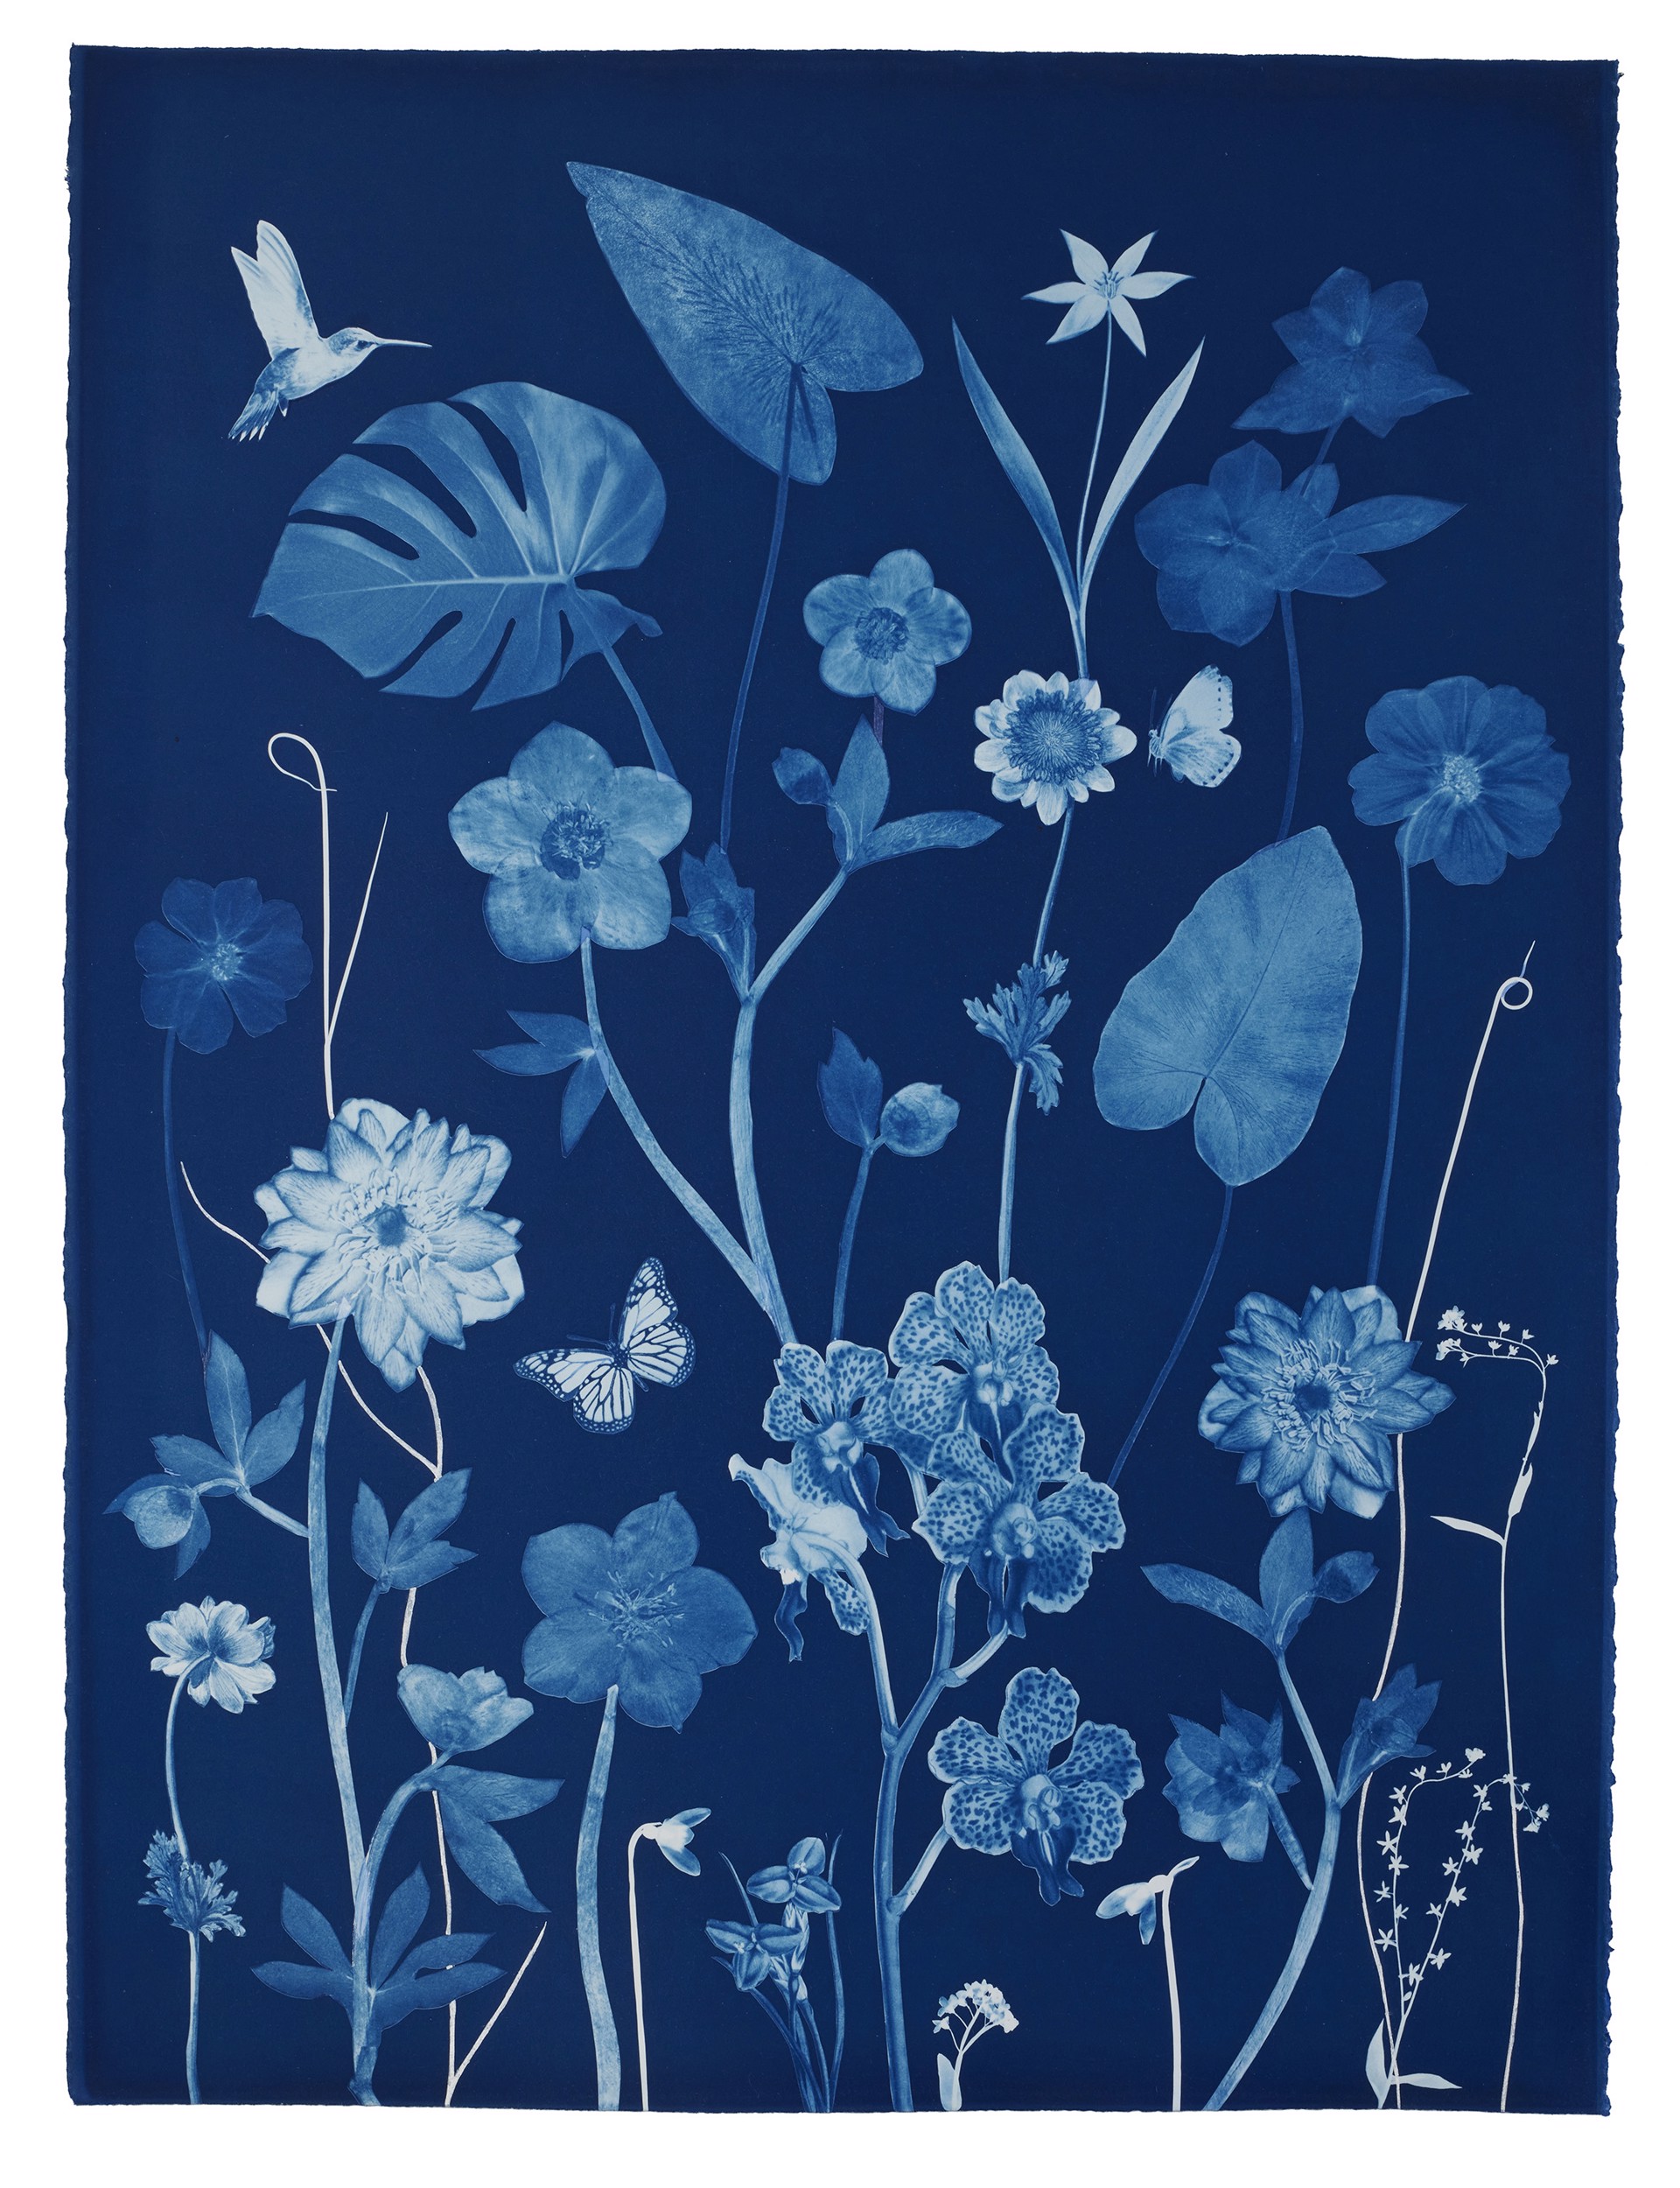 Nocturnal Nature (Orchid, Leaves, Hellebore, Hummingbird, etc) by Julia Whitney Barnes